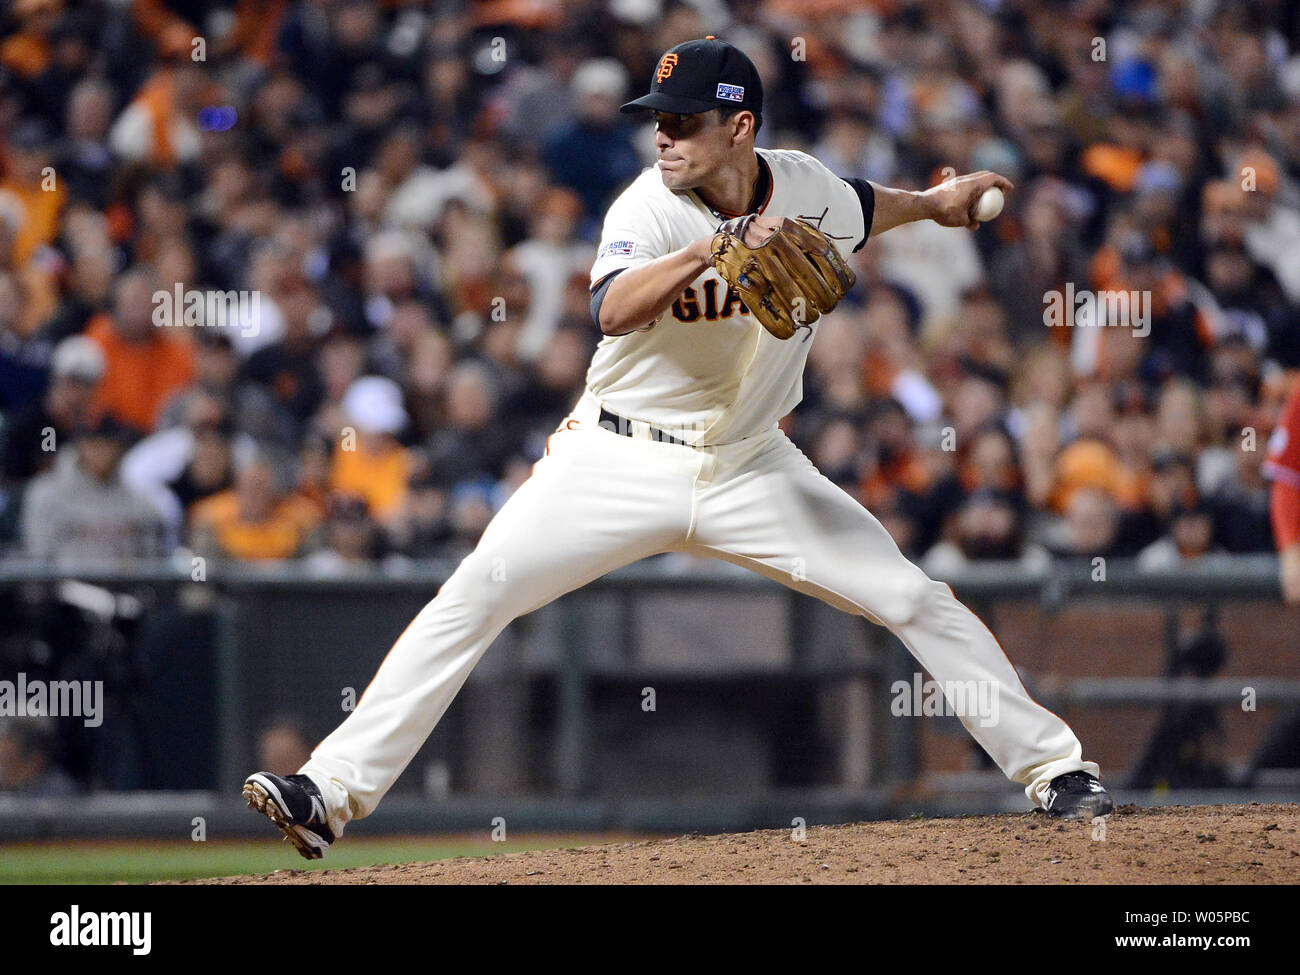 San Francisco Giants relief pitcher Javier Lopez throws a pitch in the sixth inning against the Washington Nationals in game 4 of the National League Division Series at AT&T Park in San Francisco on October 7, 2014.    UPI/Terry Schmitt Stock Photo